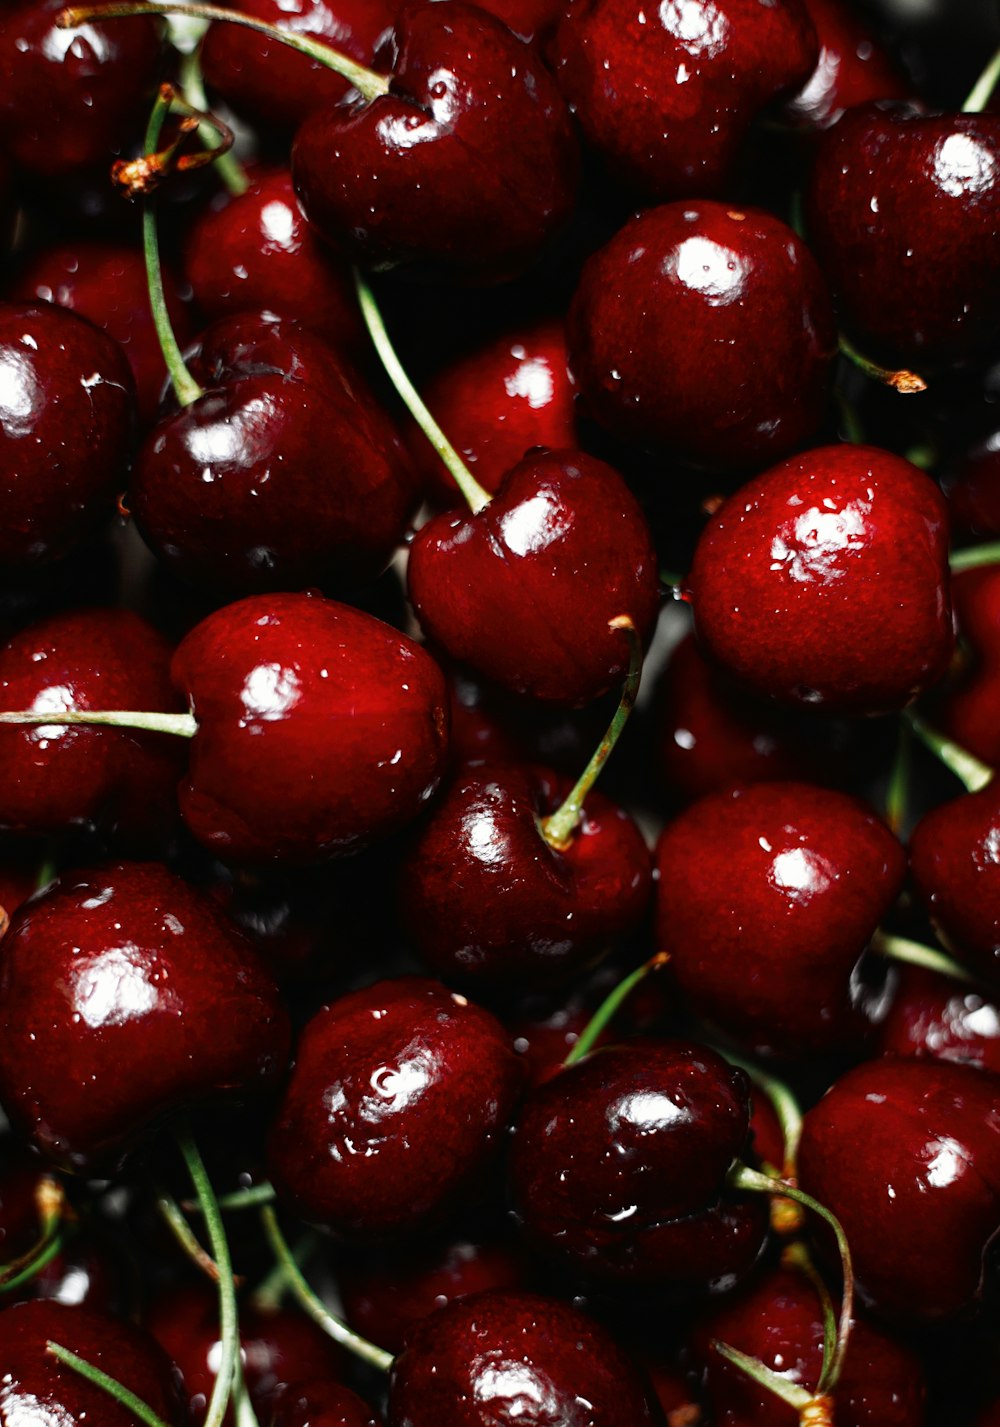 Red cherry fruit in close up photography photo – Brown Image Unsplash